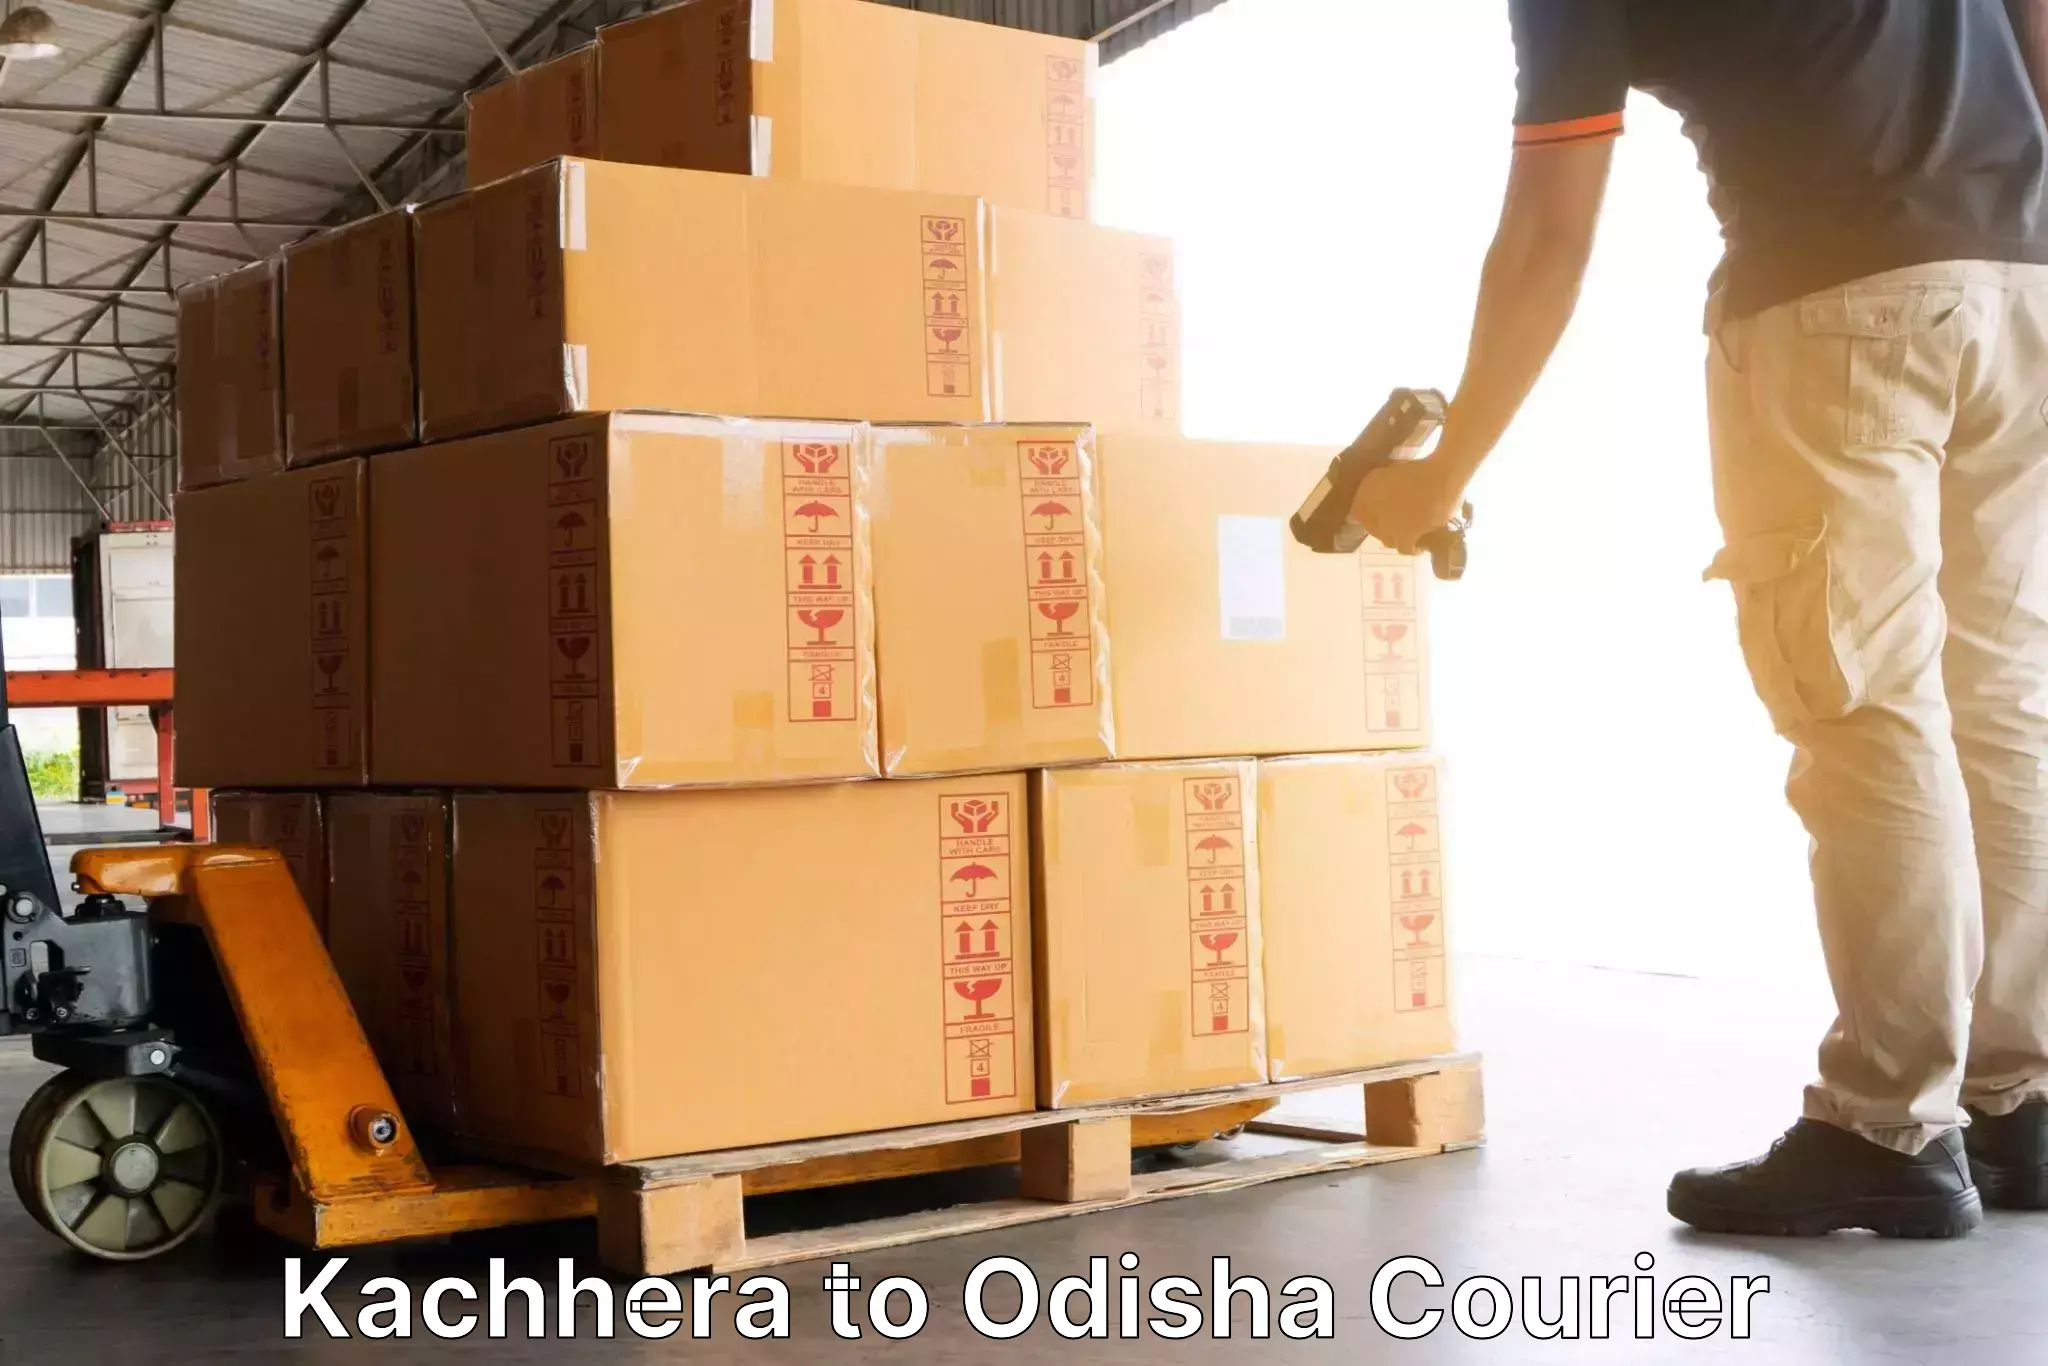 Express delivery solutions Kachhera to Tihidi